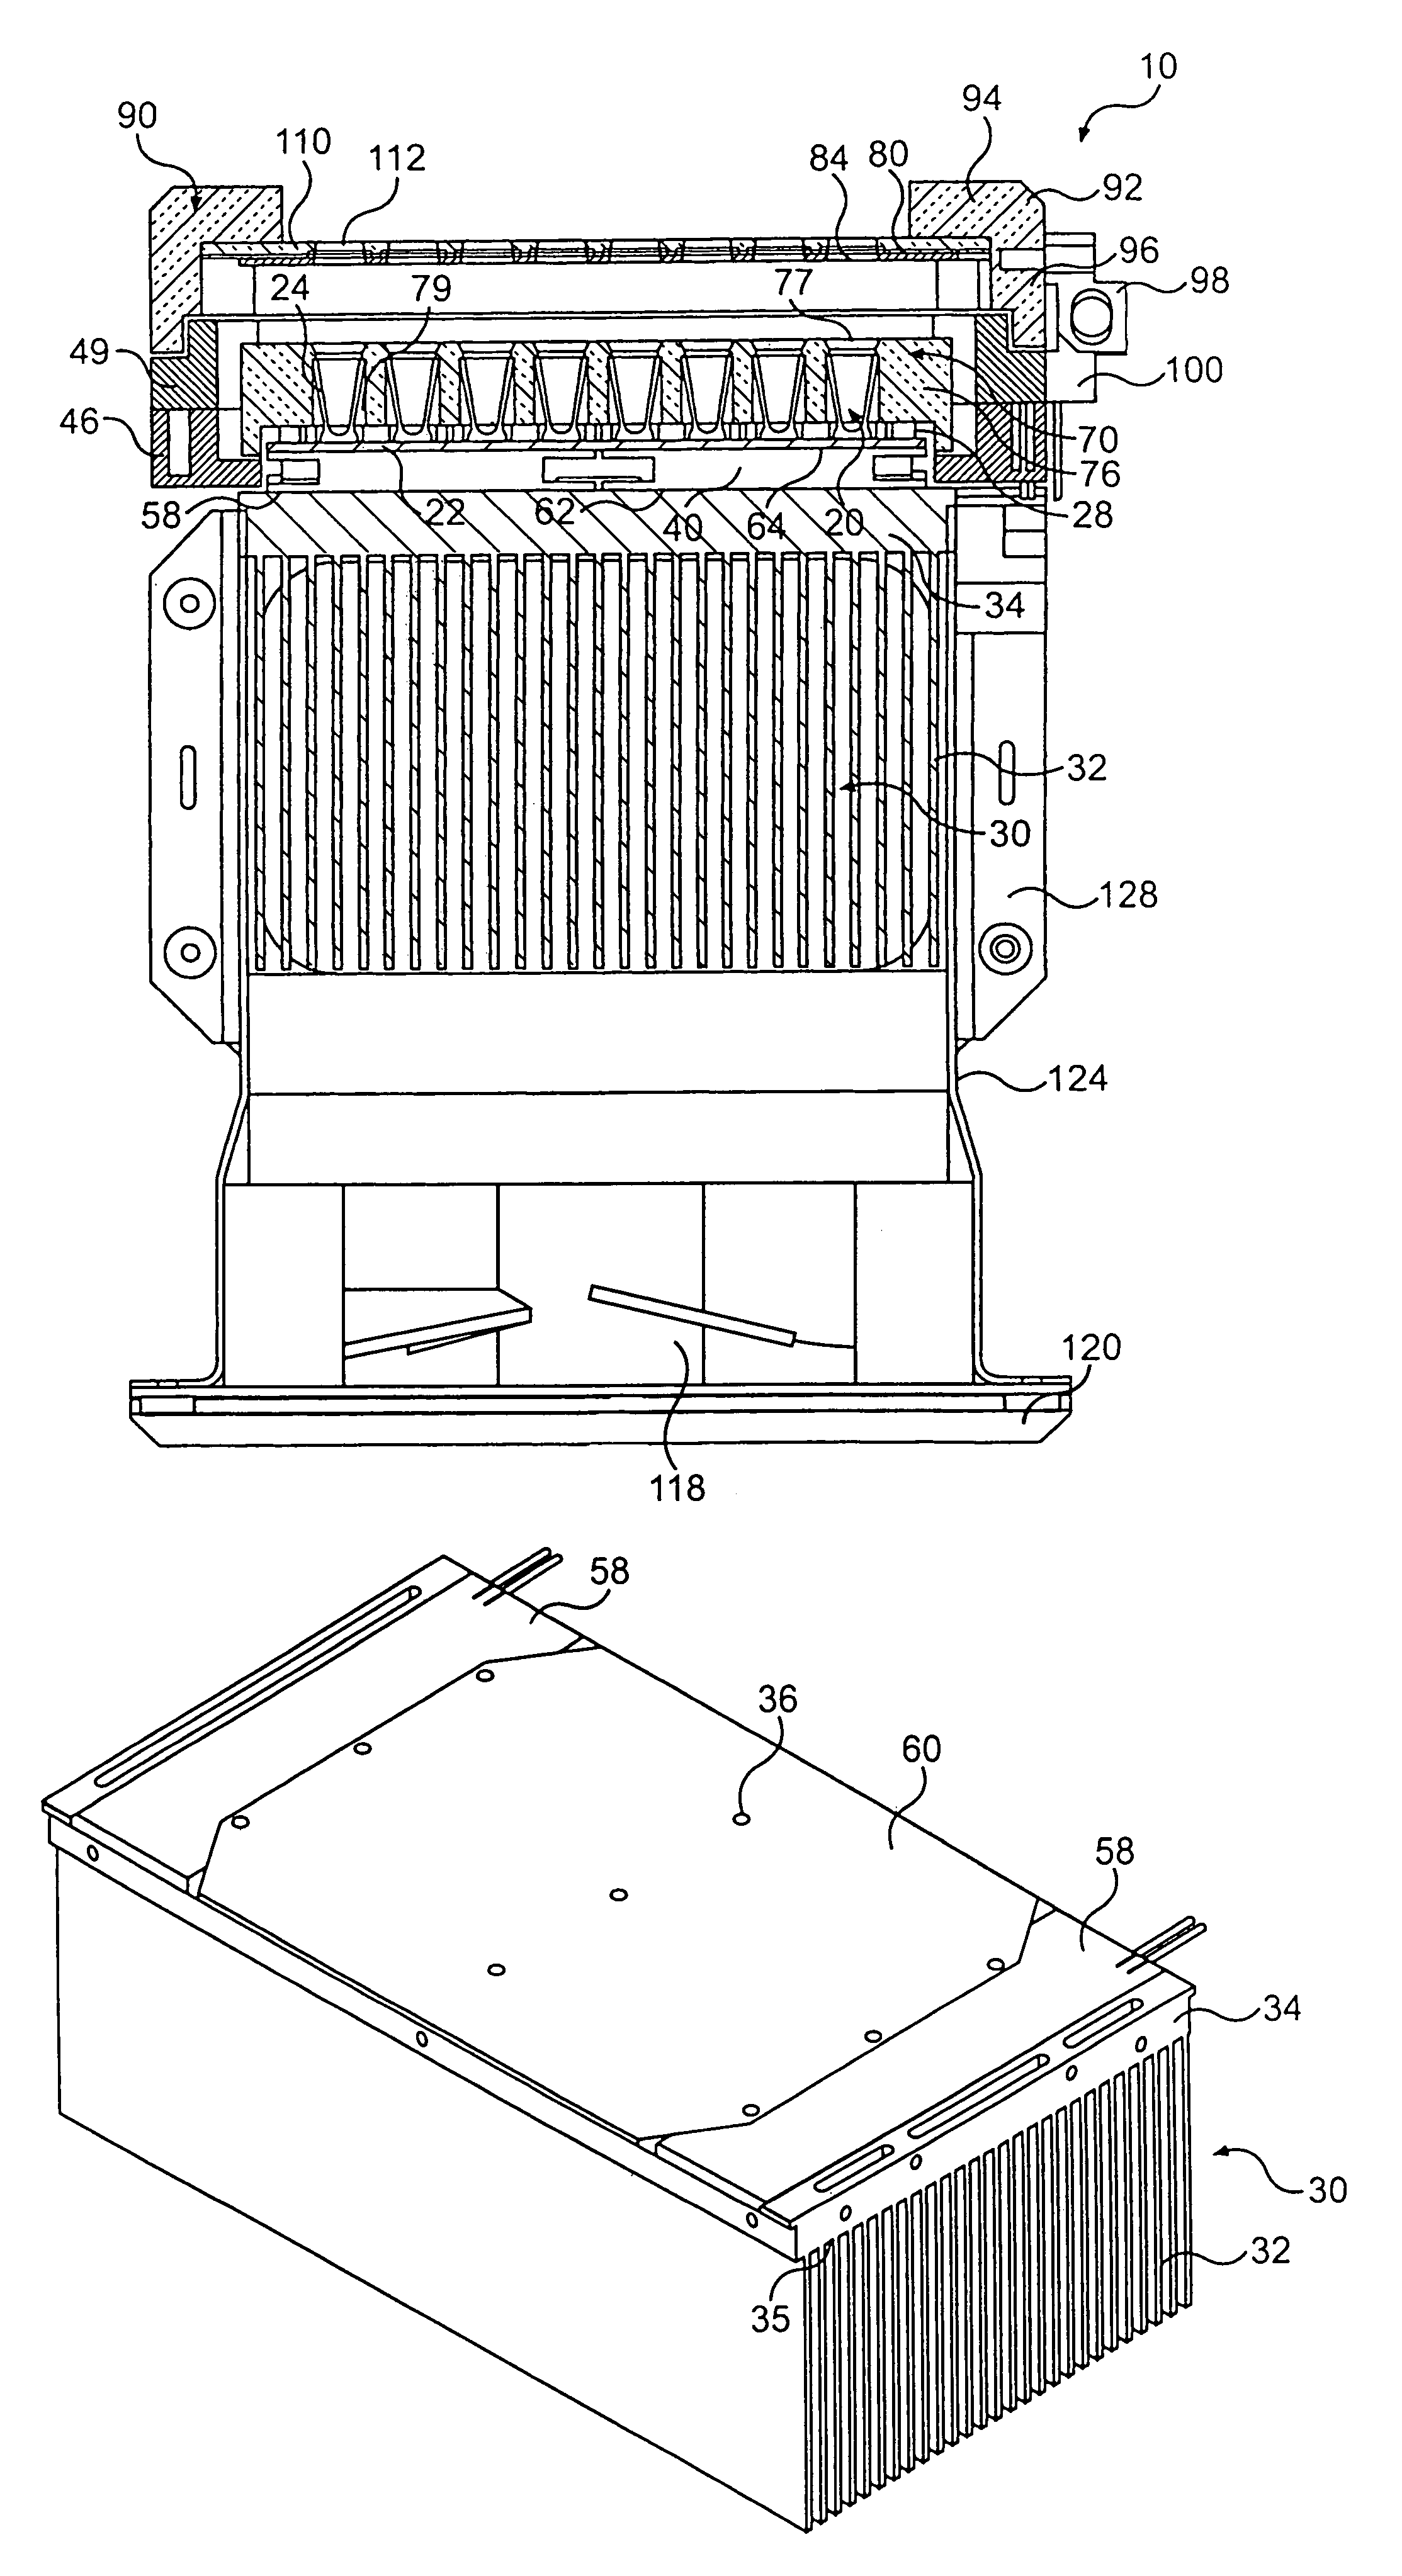 Apparatus and method for thermally cycling samples of biological material with substantial temperature uniformity